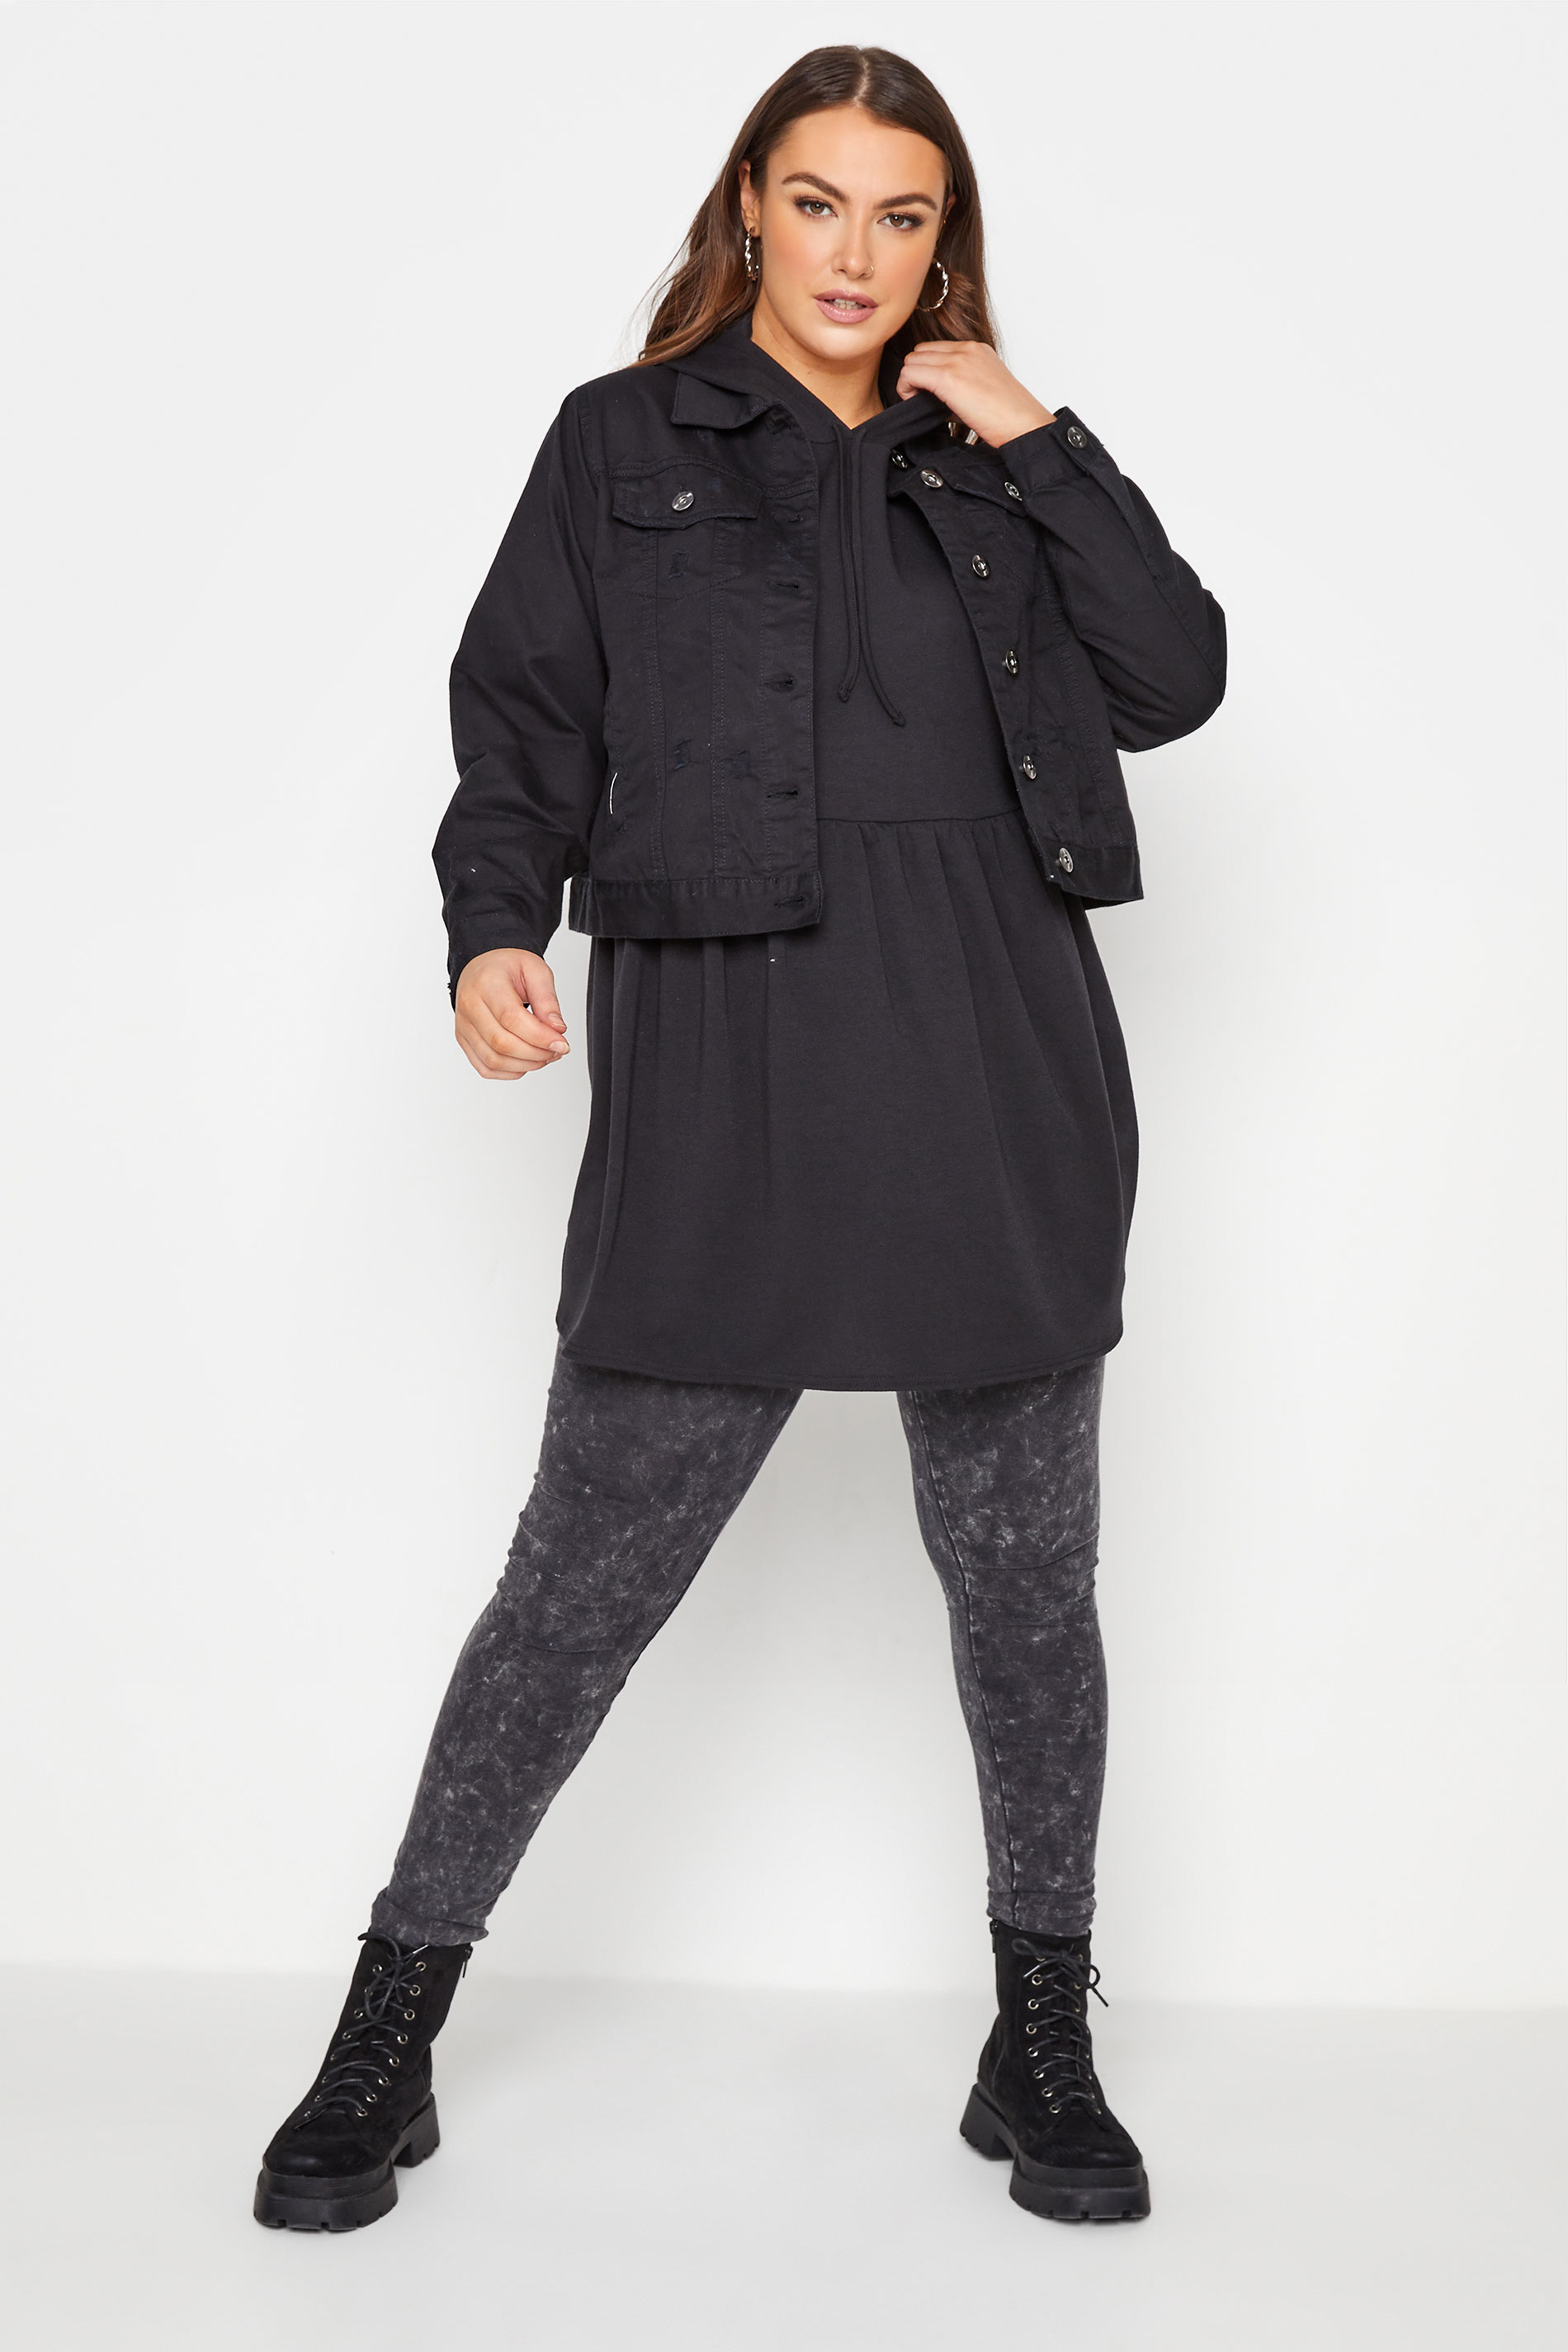 Plus Size LIMITED COLLECTION Black Peplum Hoodie | Yours Clothing 1